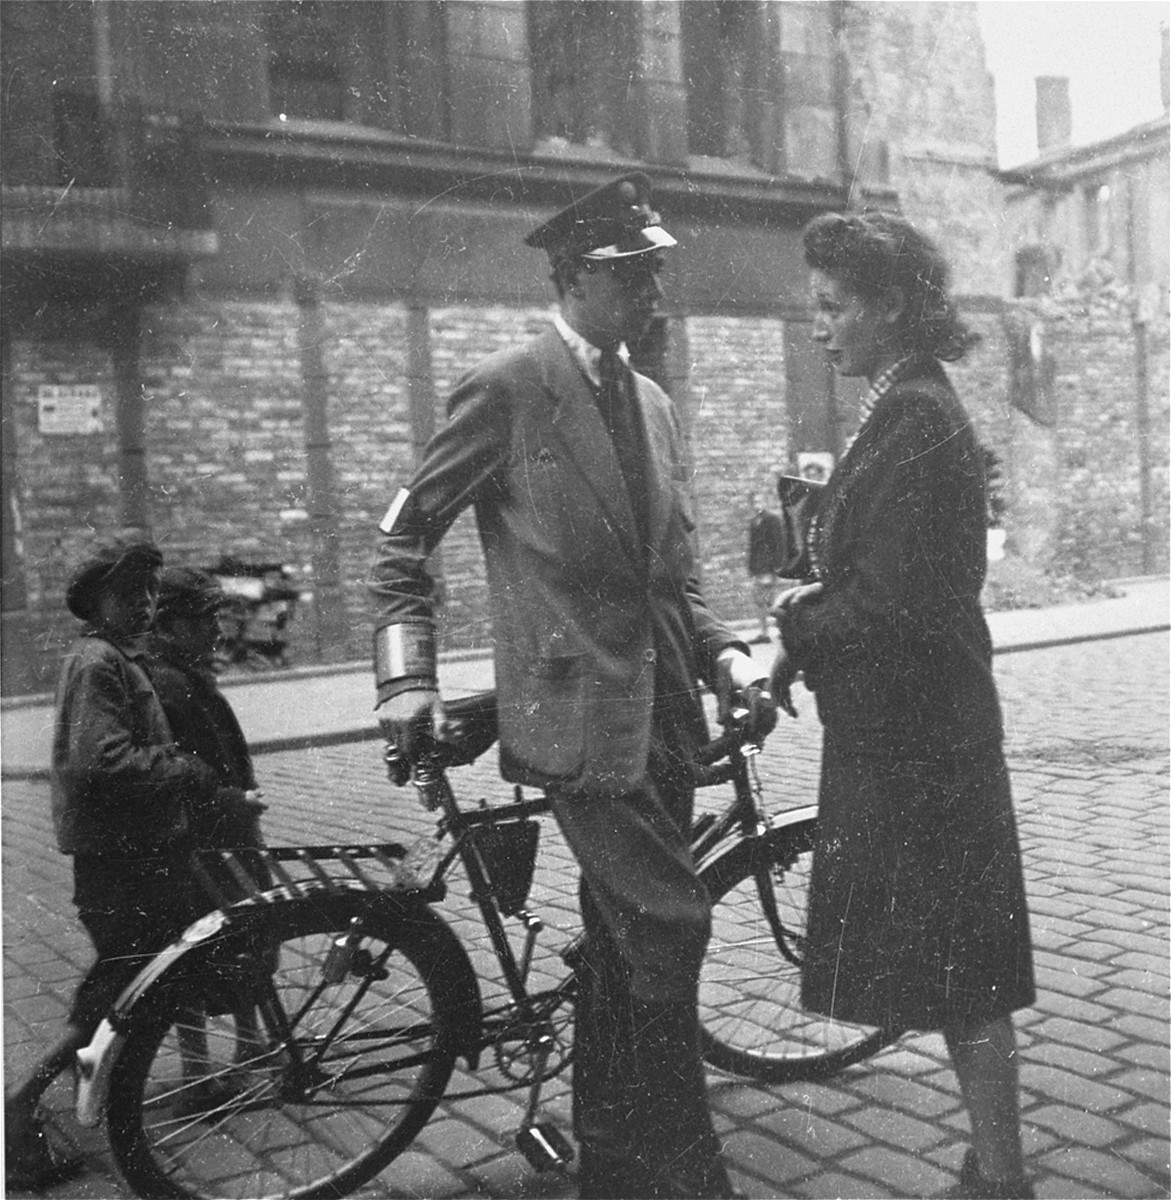 A Jewish policeman speaks with a woman on the street in the Warsaw ghetto.  

Joest's captions reads: "It looked like a flirtation, this brief encounter between a young woman and the handsome policeman, but the begging children in the background provided a contrast."